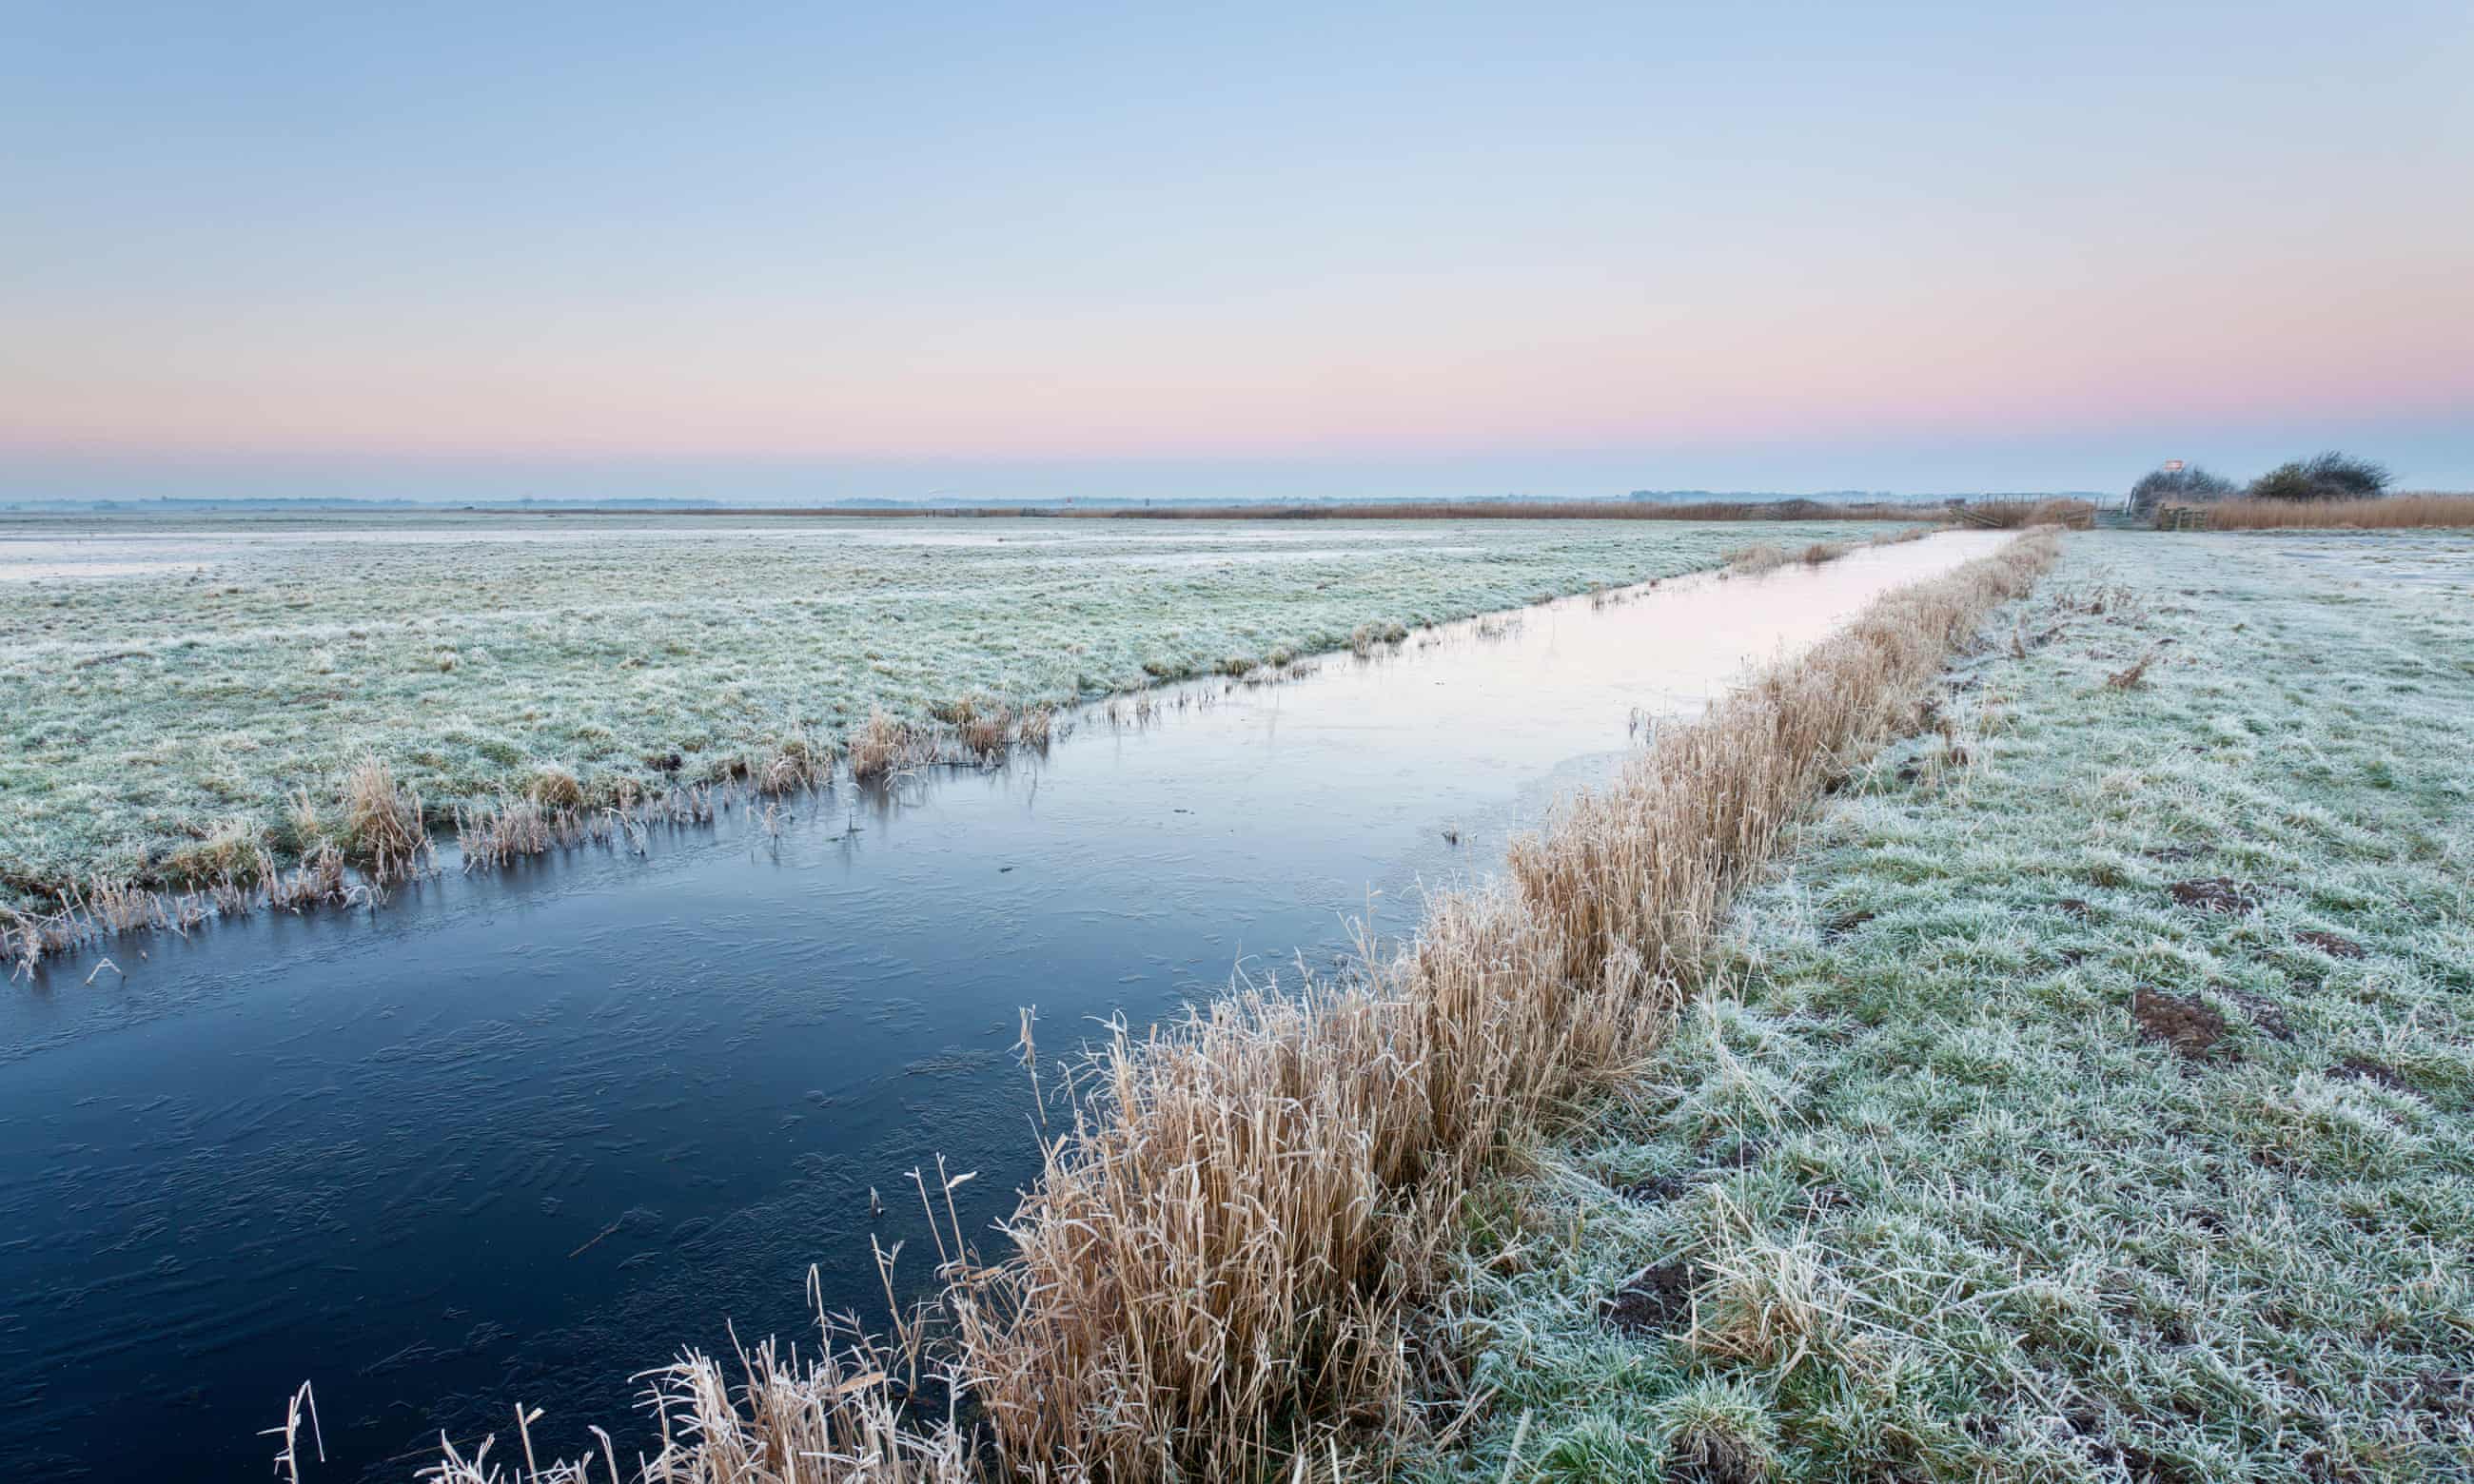 Norfolk shouldn’t play down how flat it is, says our writer. Halvergate Marshes in the Broads pictured. Photograph: Loop Images/Alamy